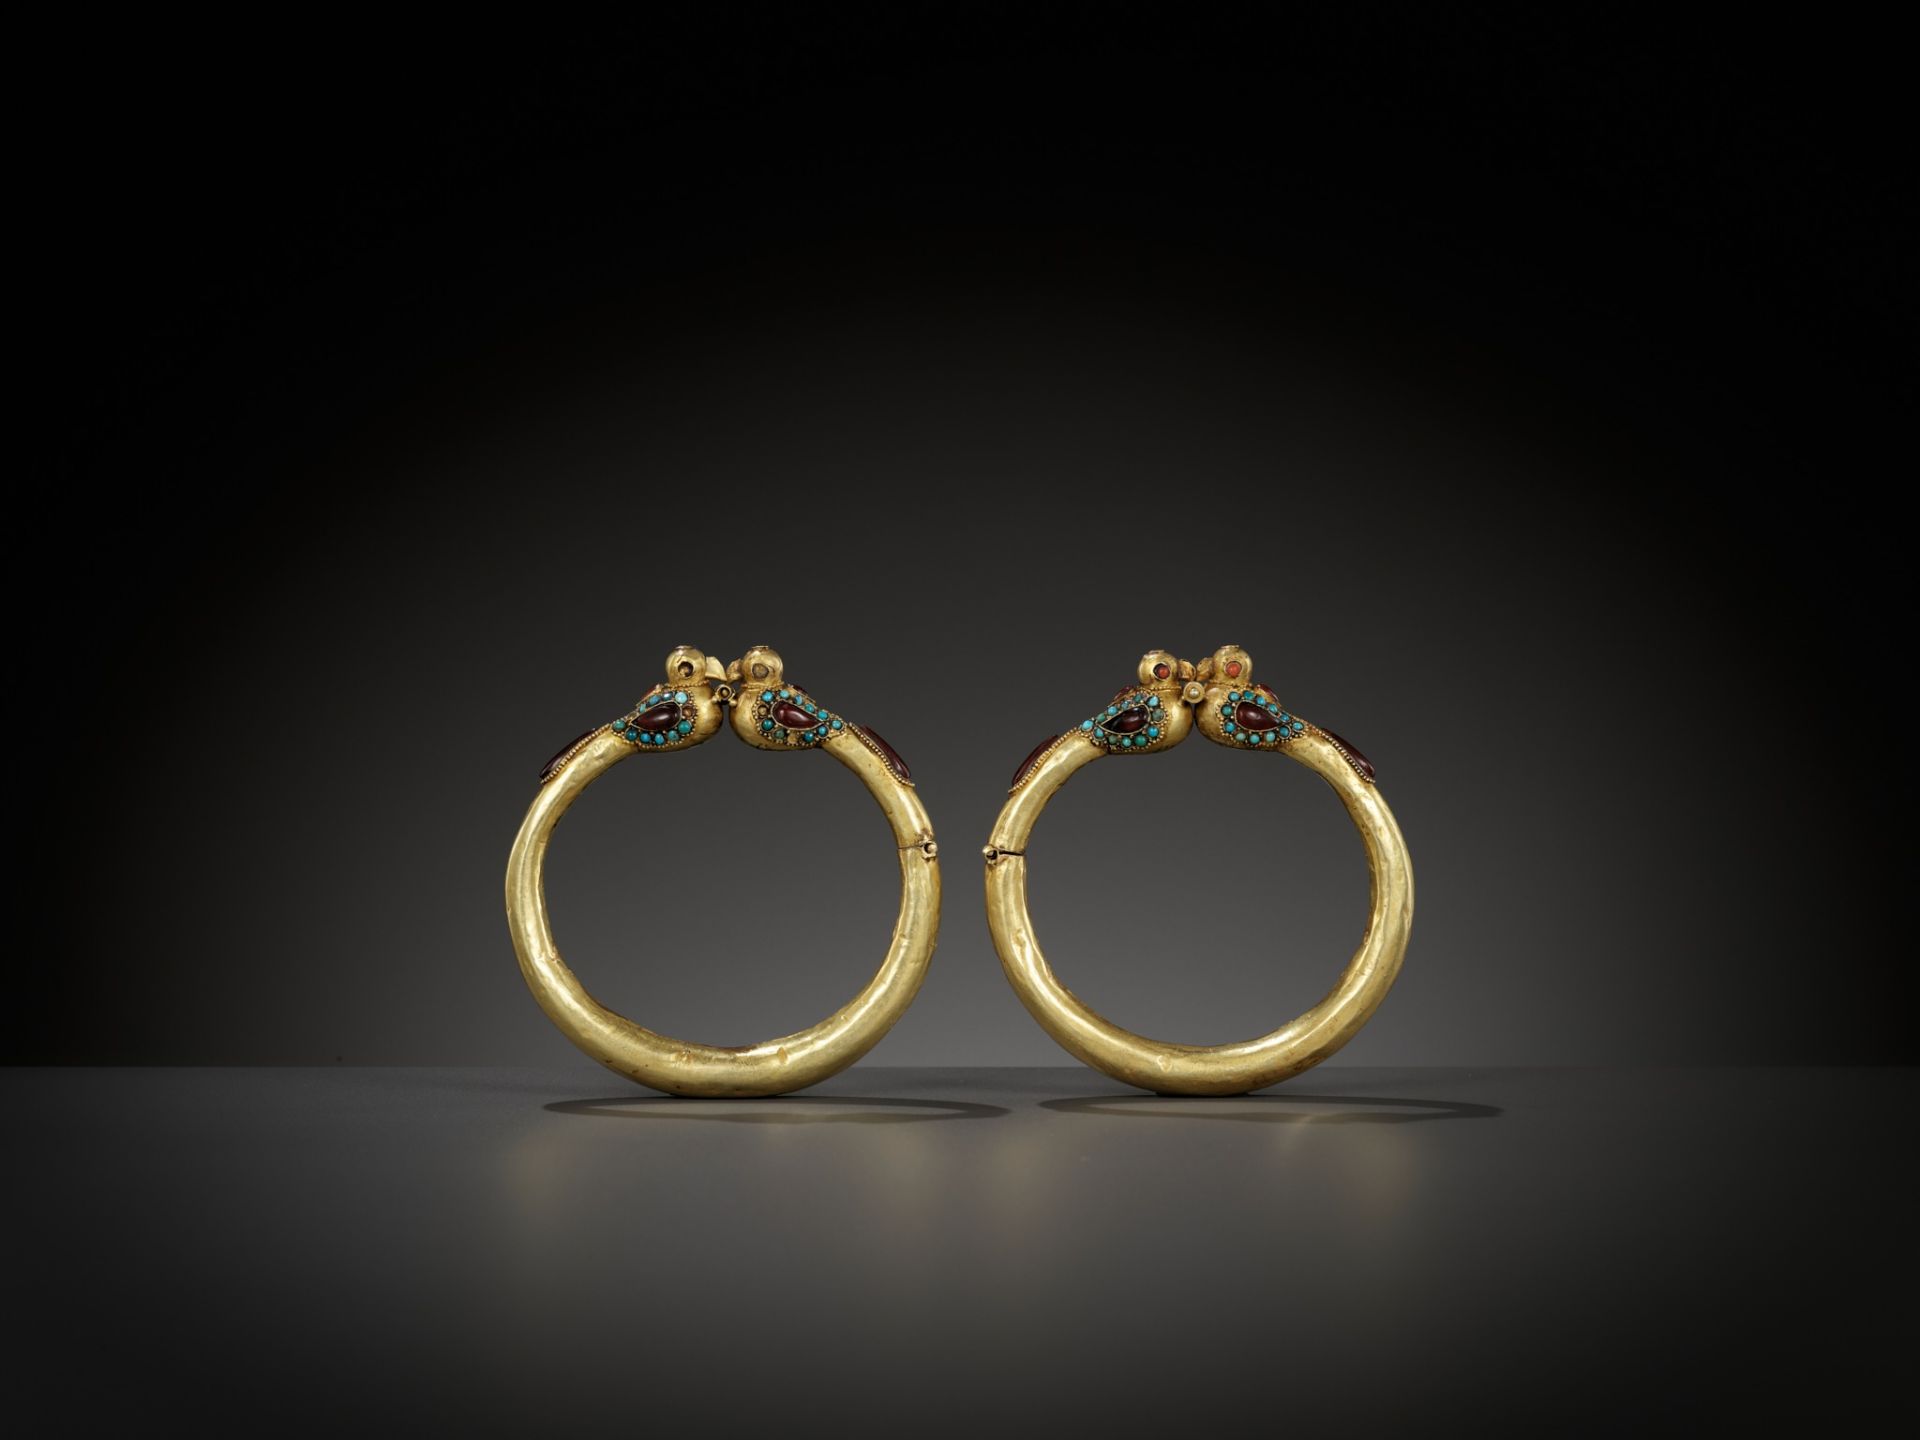 A PAIR OF GOLD 'BIRD' BANGLES, PERSIA, 11TH TO 12TH CENTURY - Image 9 of 9